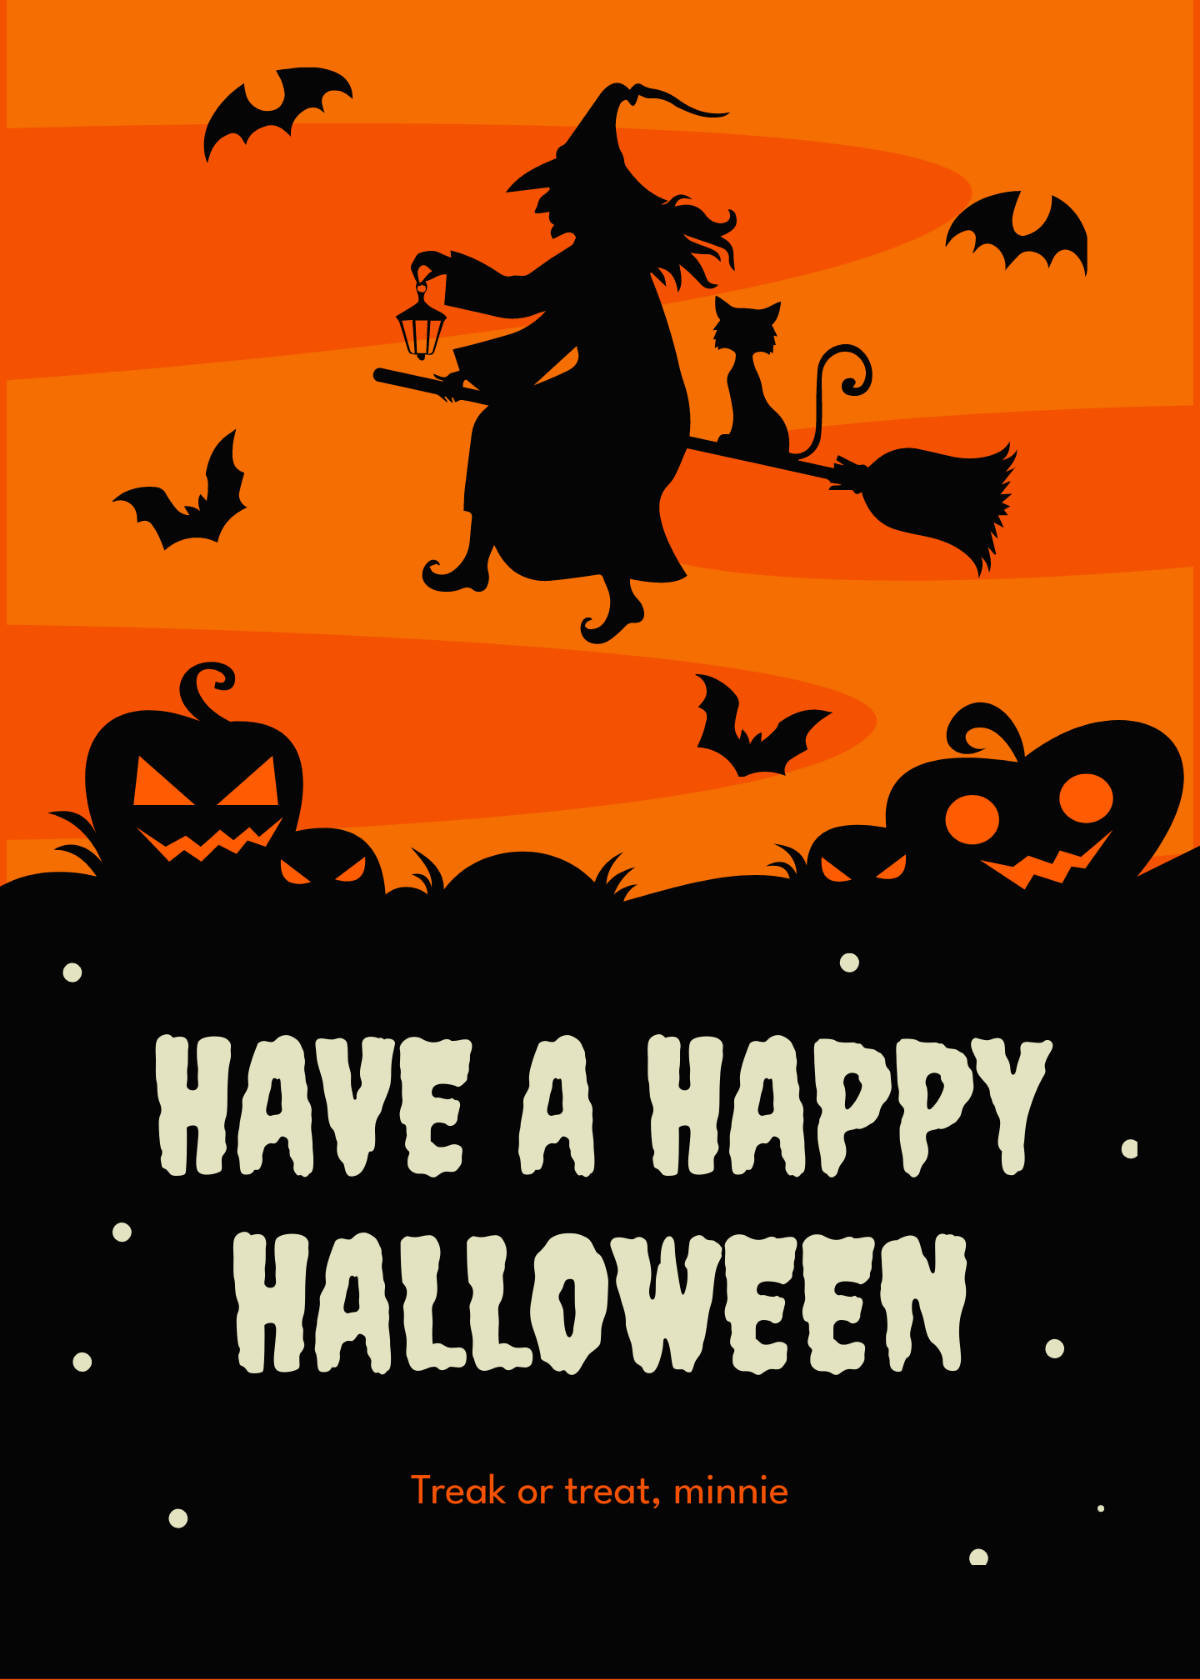 Halloween Day Wishes Template